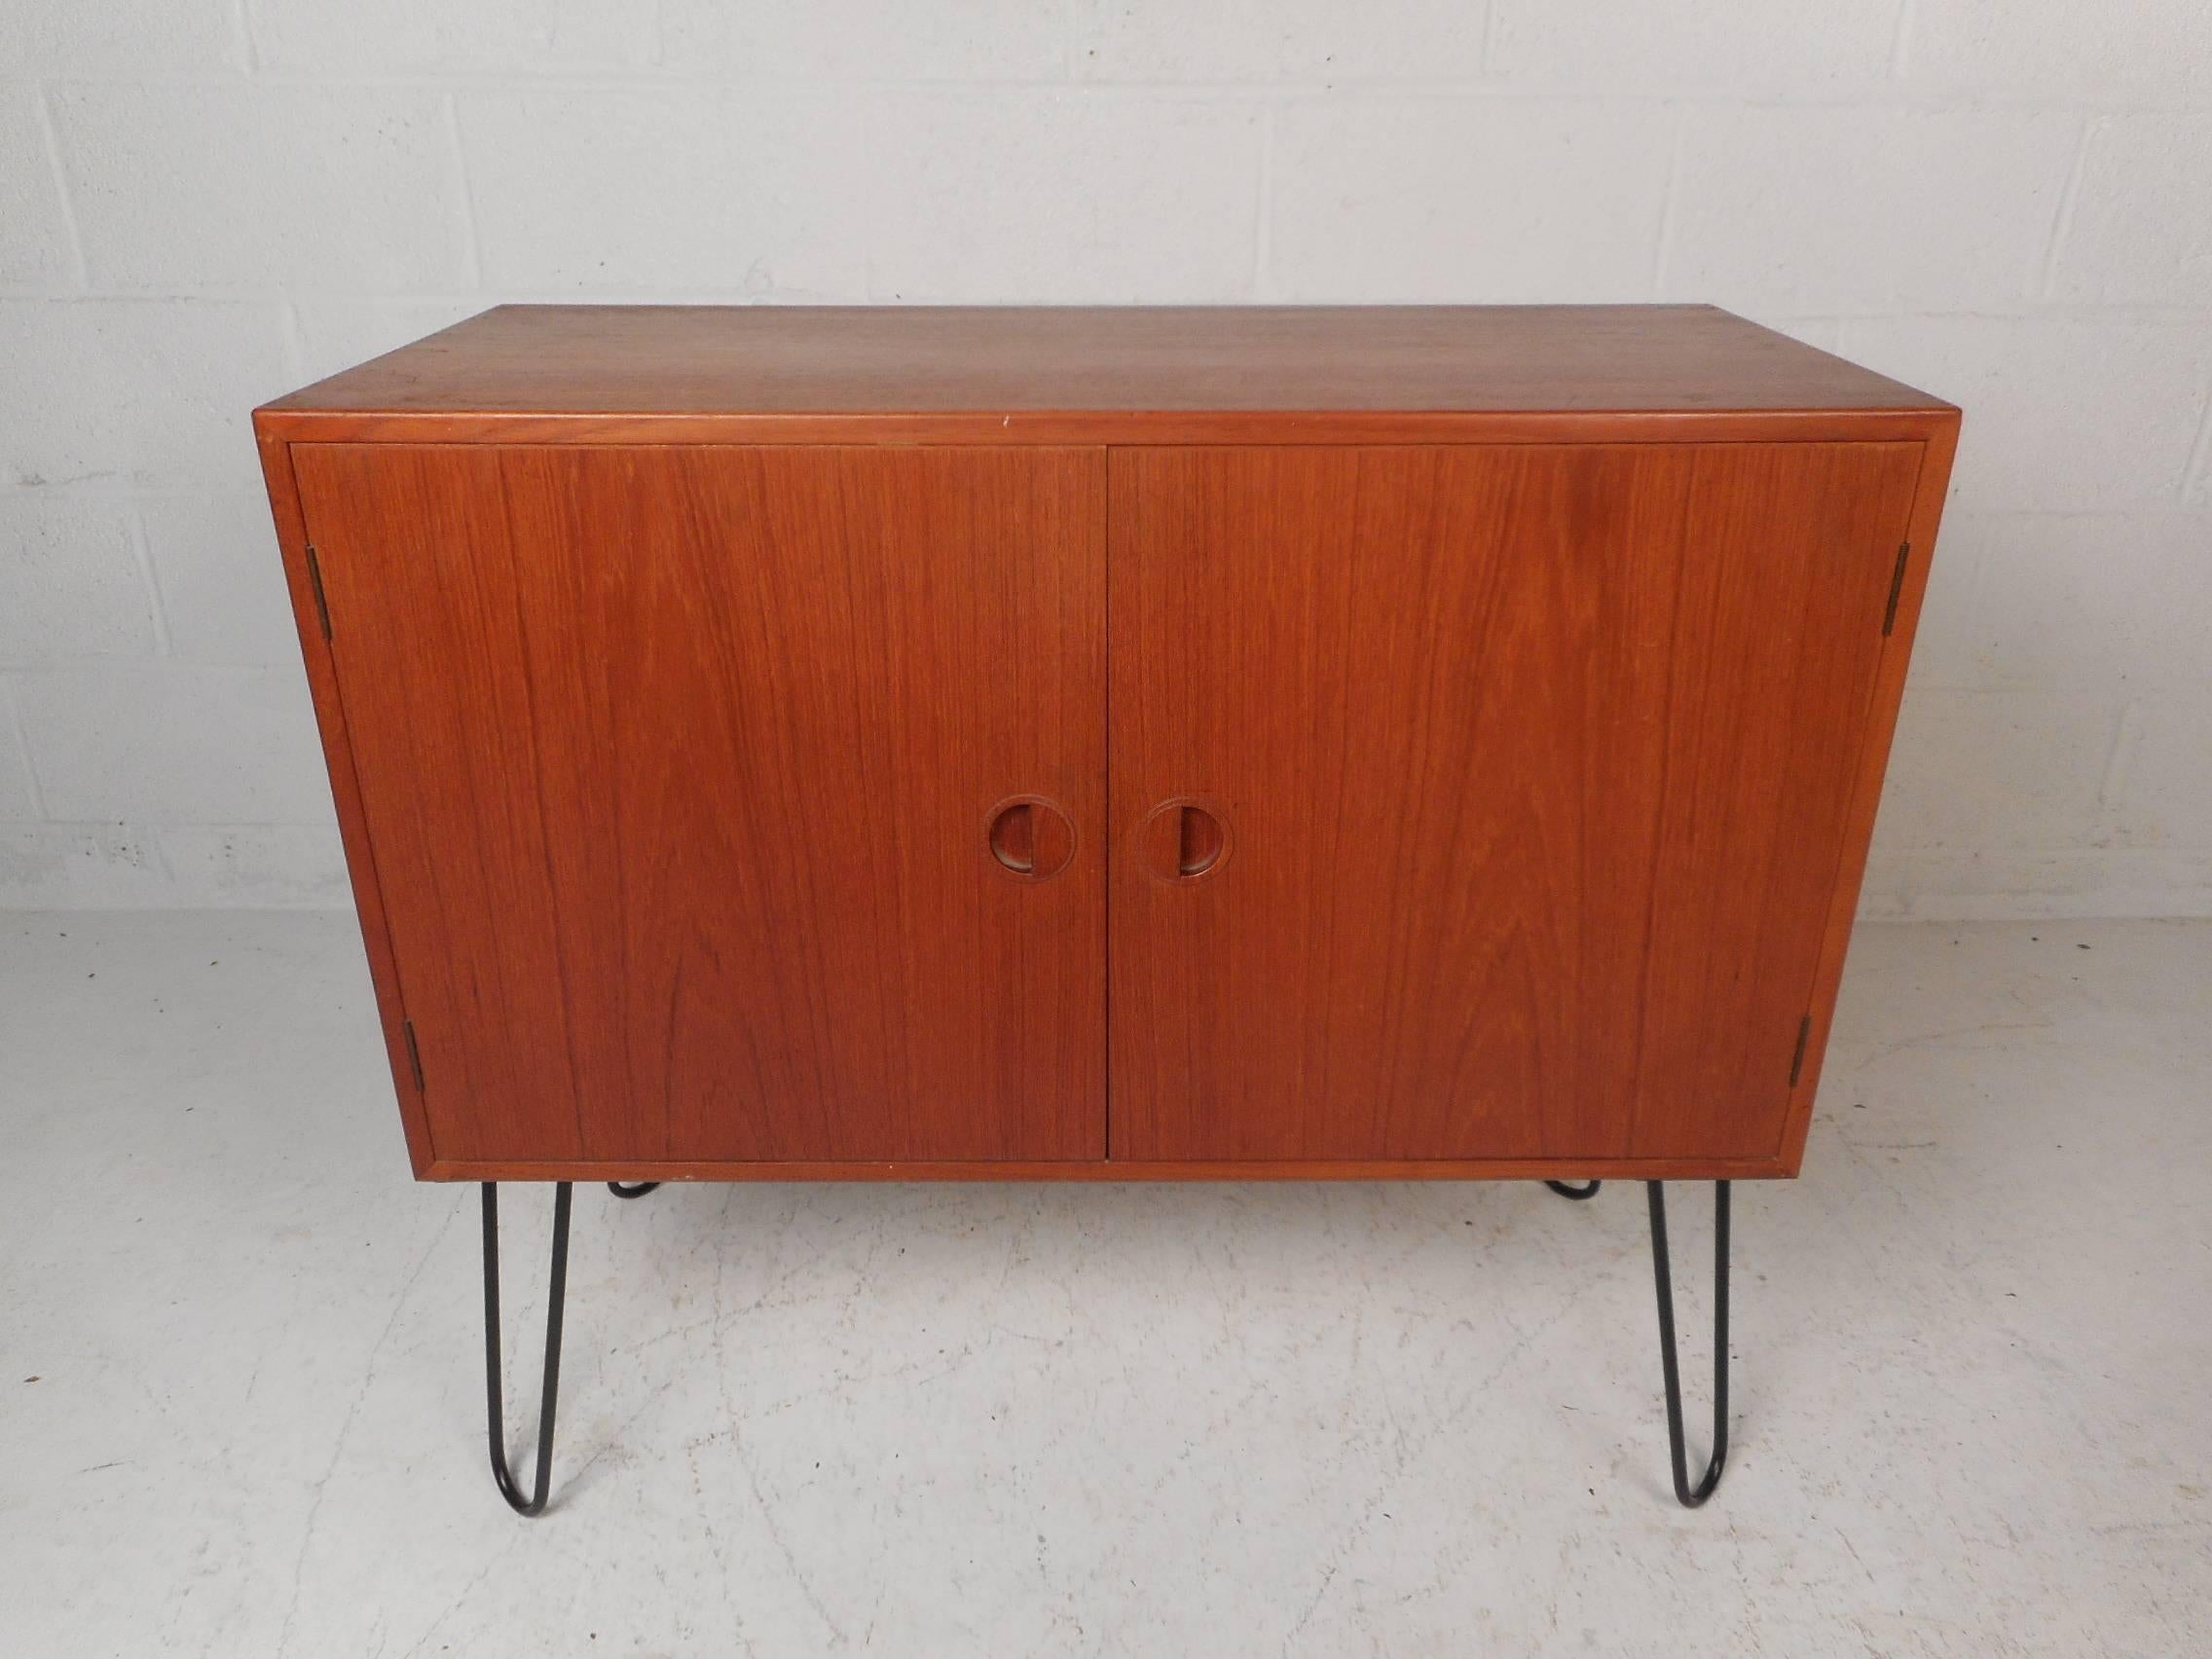 This stunning vintage modern case piece features two cabinet doors with half moon recessed pulls hiding two large compartments with shelves. This Danish modern cabinet sits on top of sturdy black metal hairpin legs. An elegant teak finish